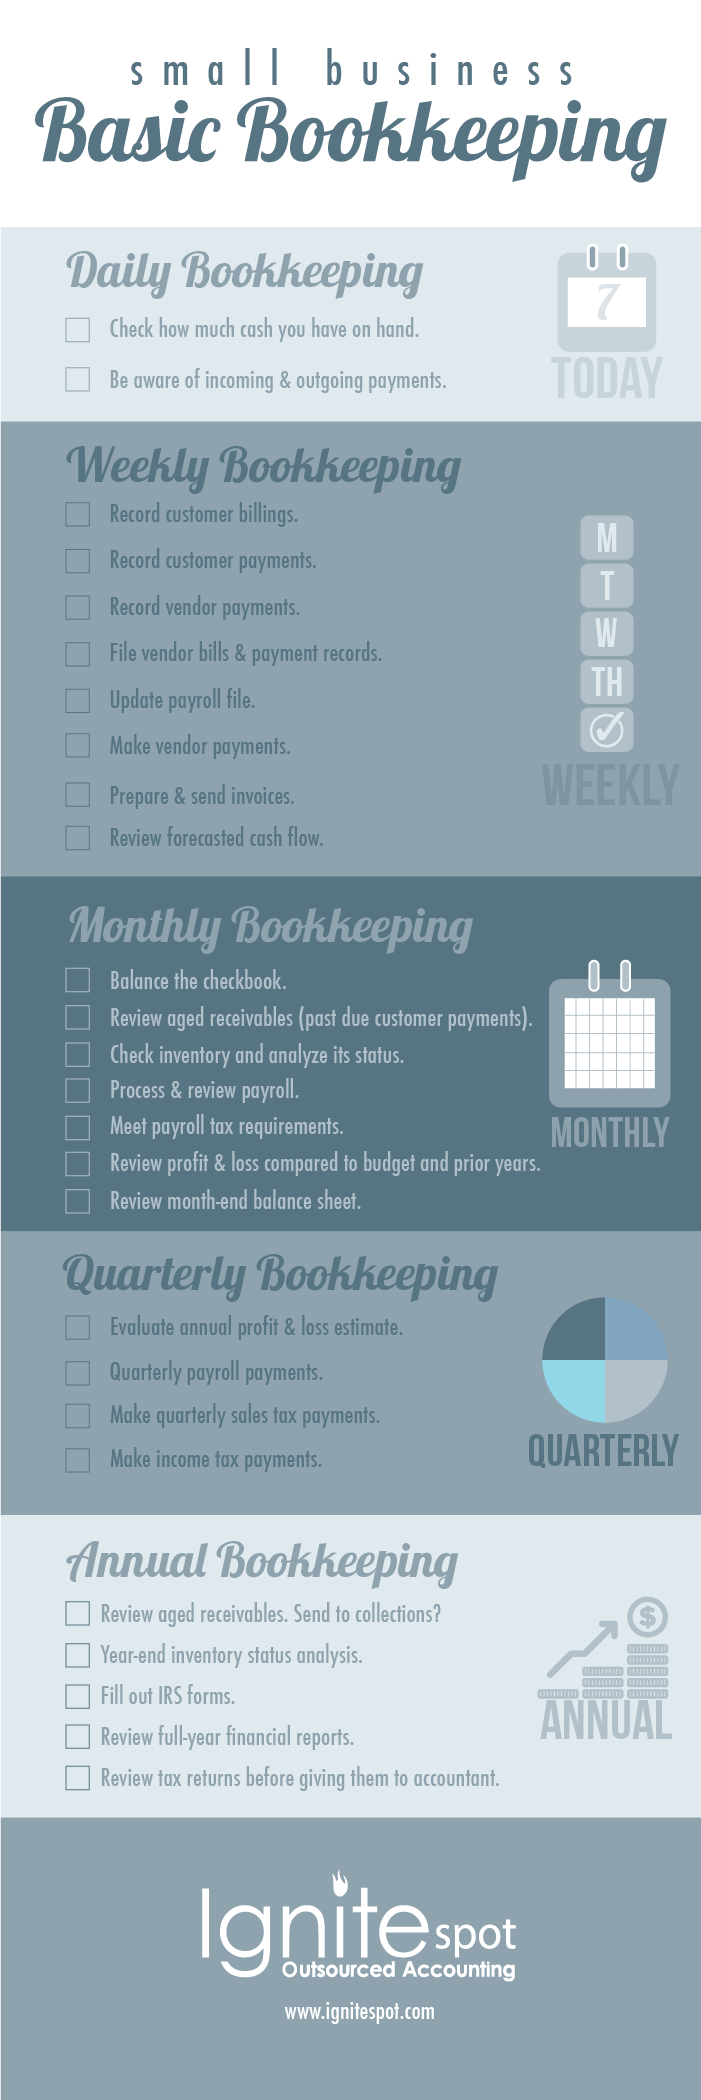 year-end-checklist-for-small-business-bookkeeping